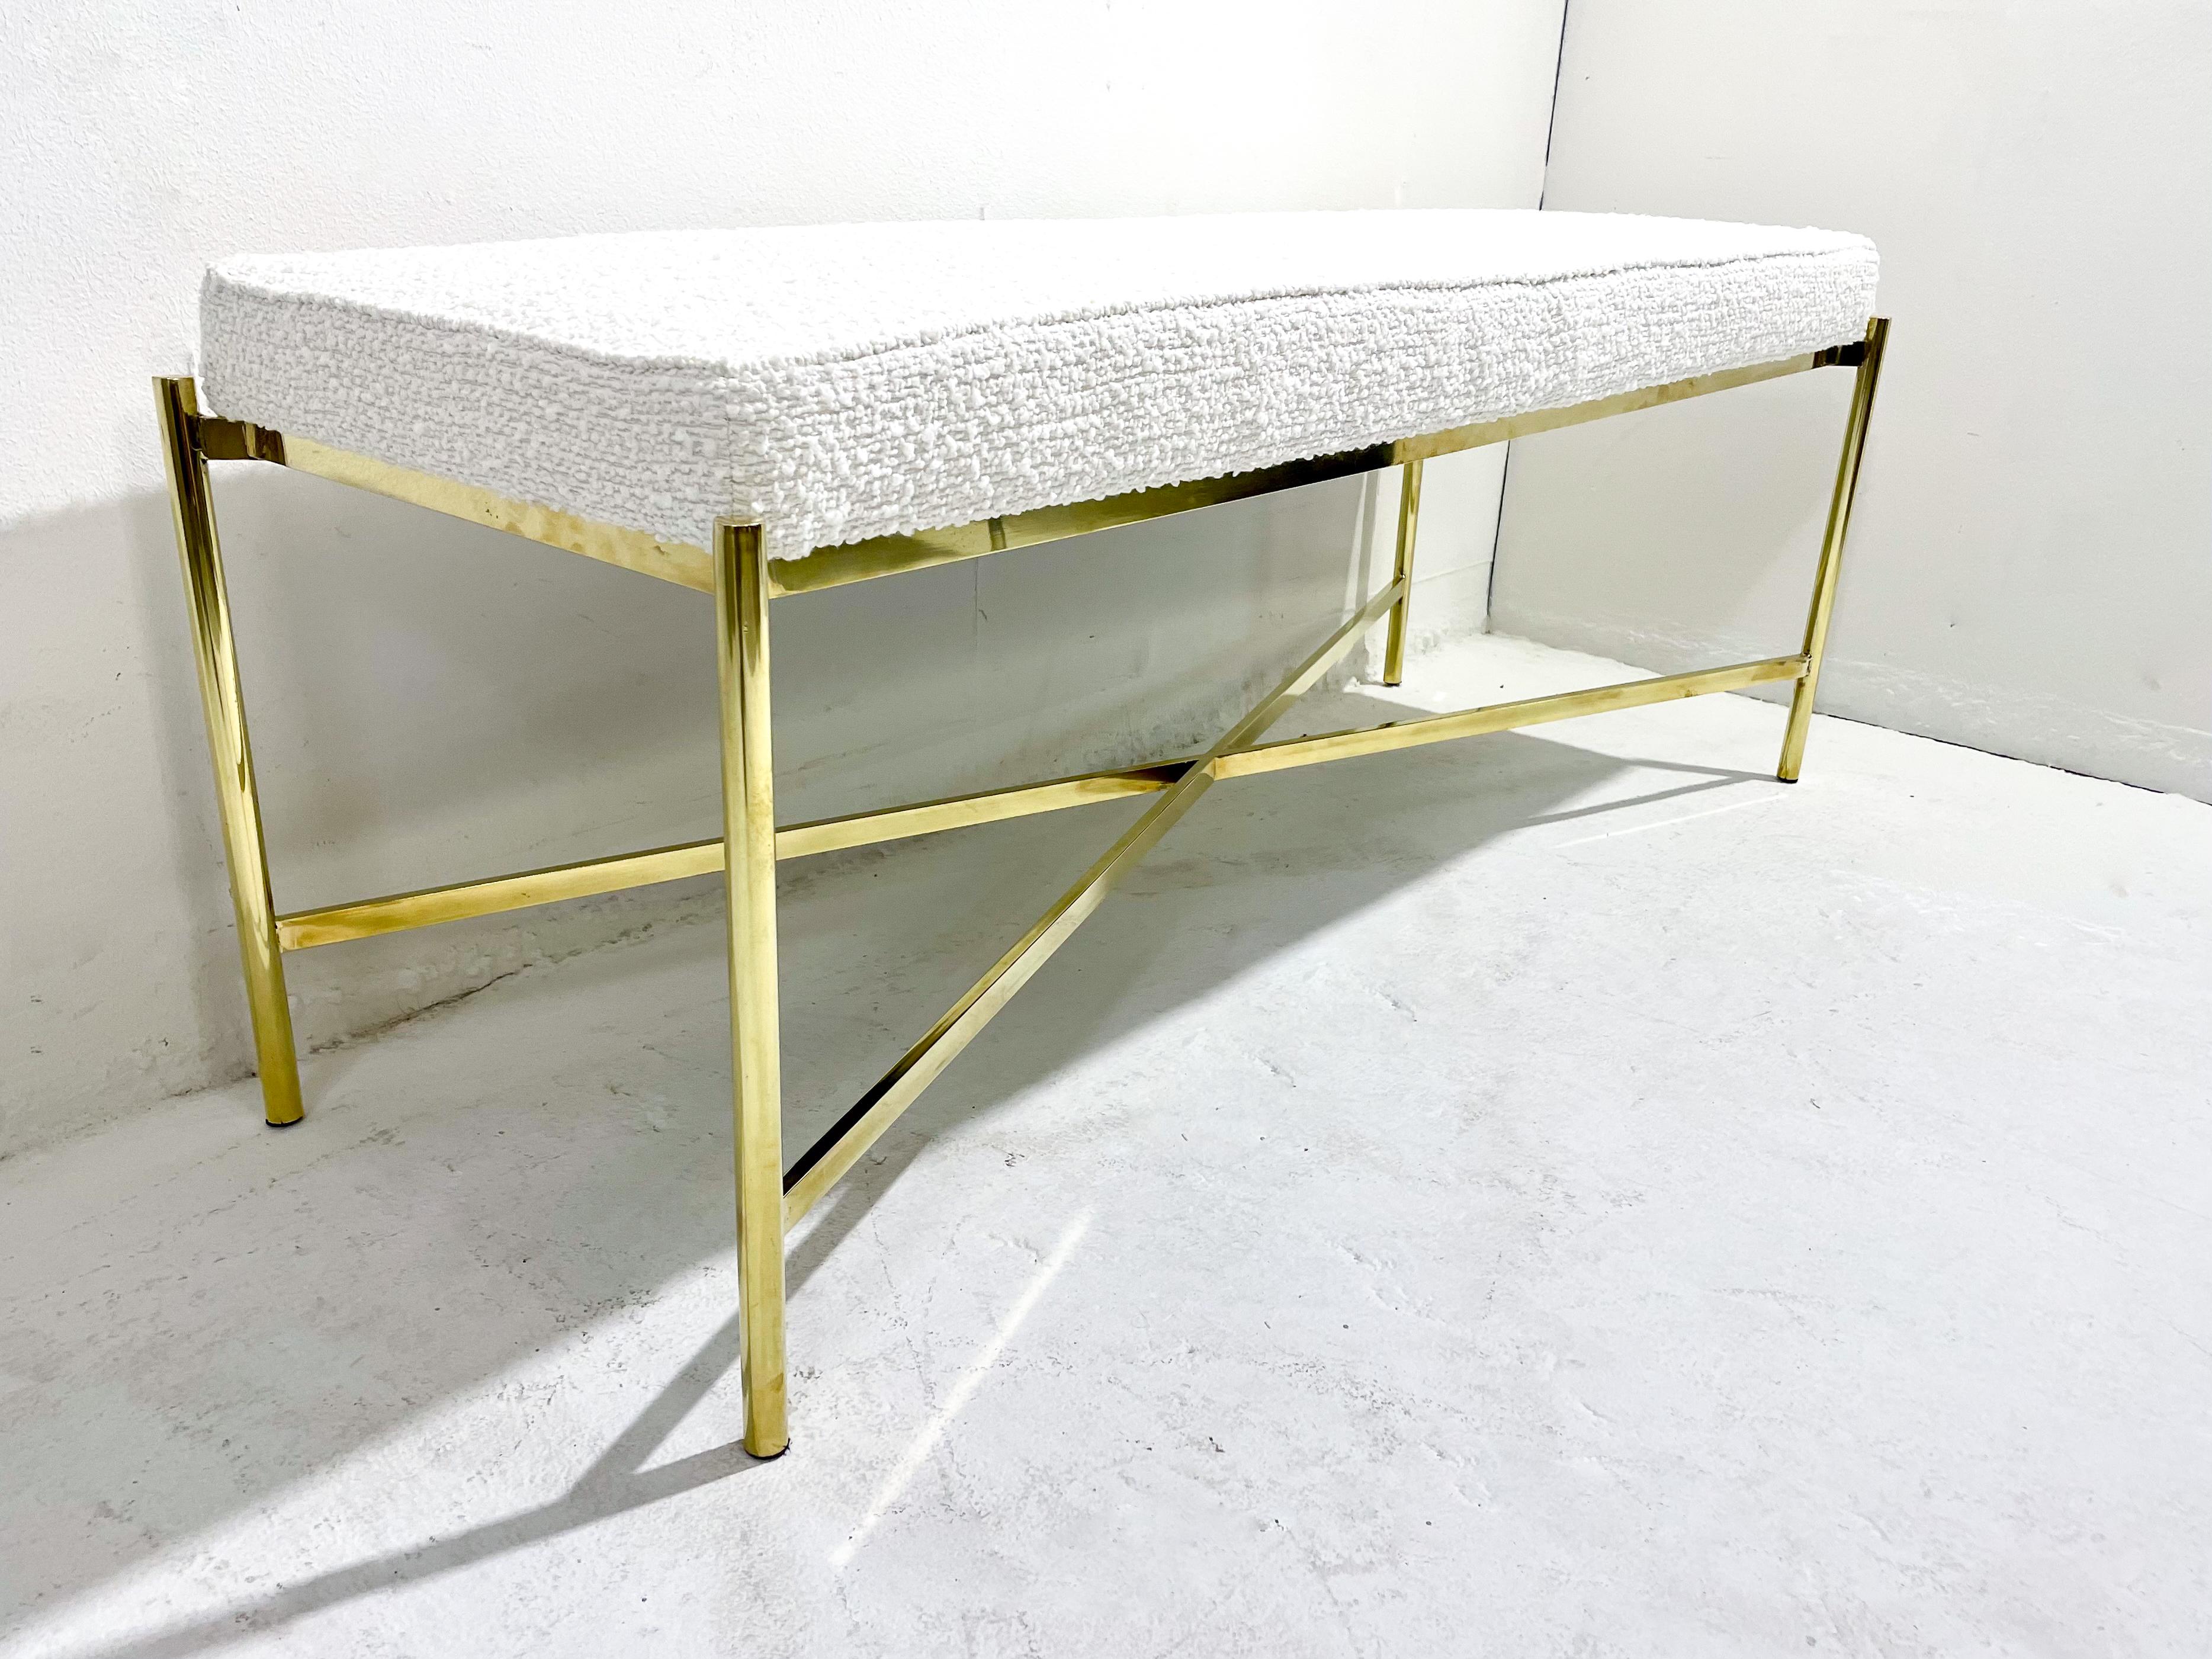 Mid-Century Modern Italian brass bench, new upholstery - 2 available
Price is per item.